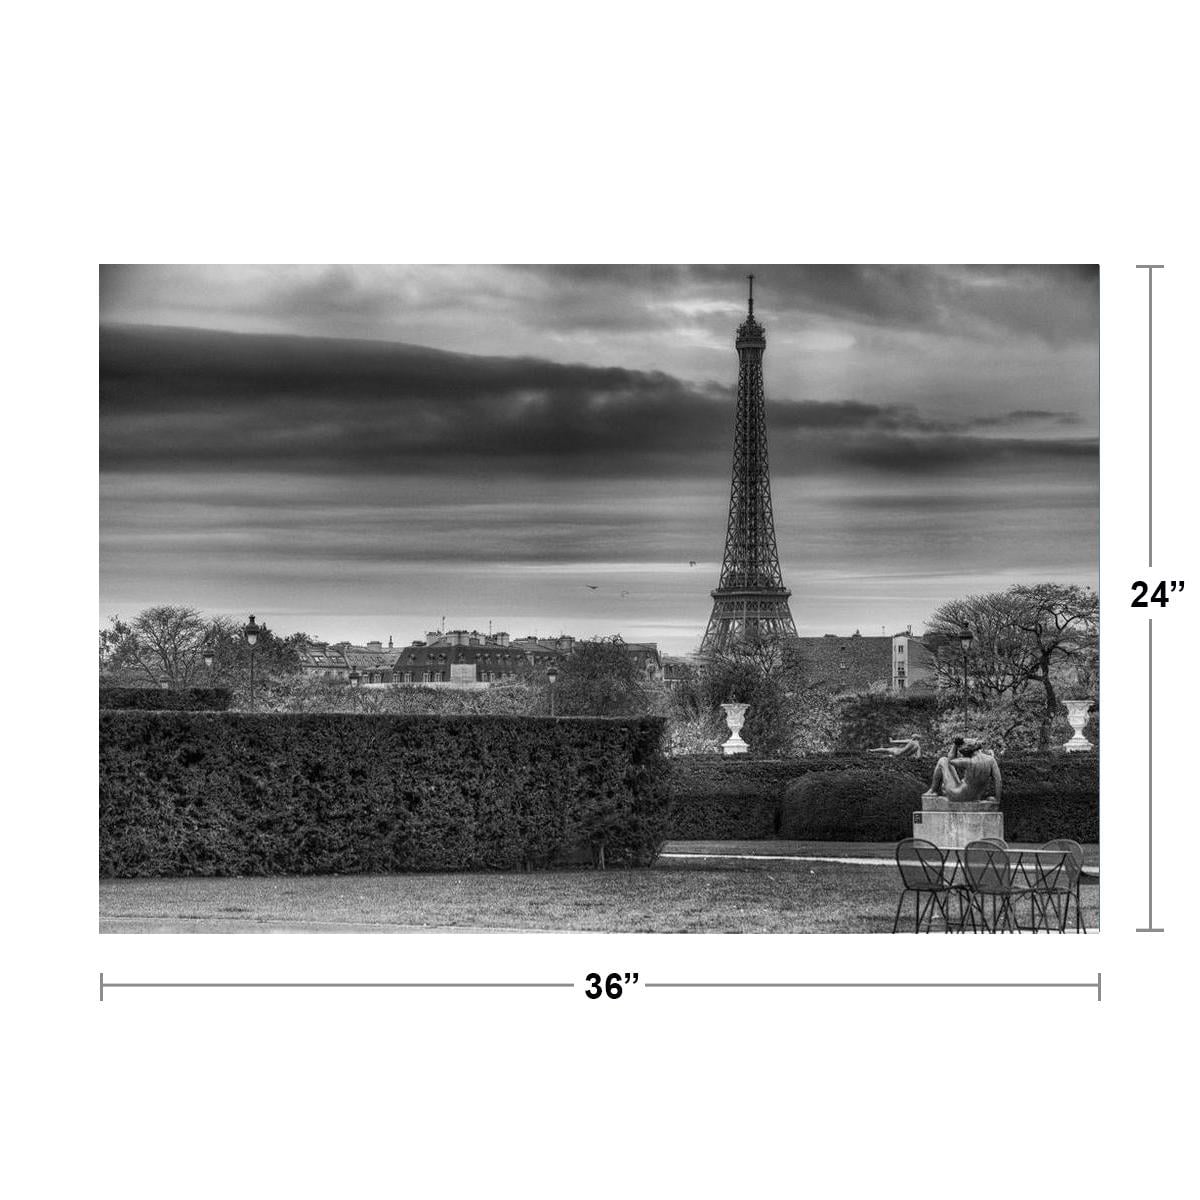 Eiffel Tower on Cloudy Day Paris France Black and White B&W Photo Art Print Post 